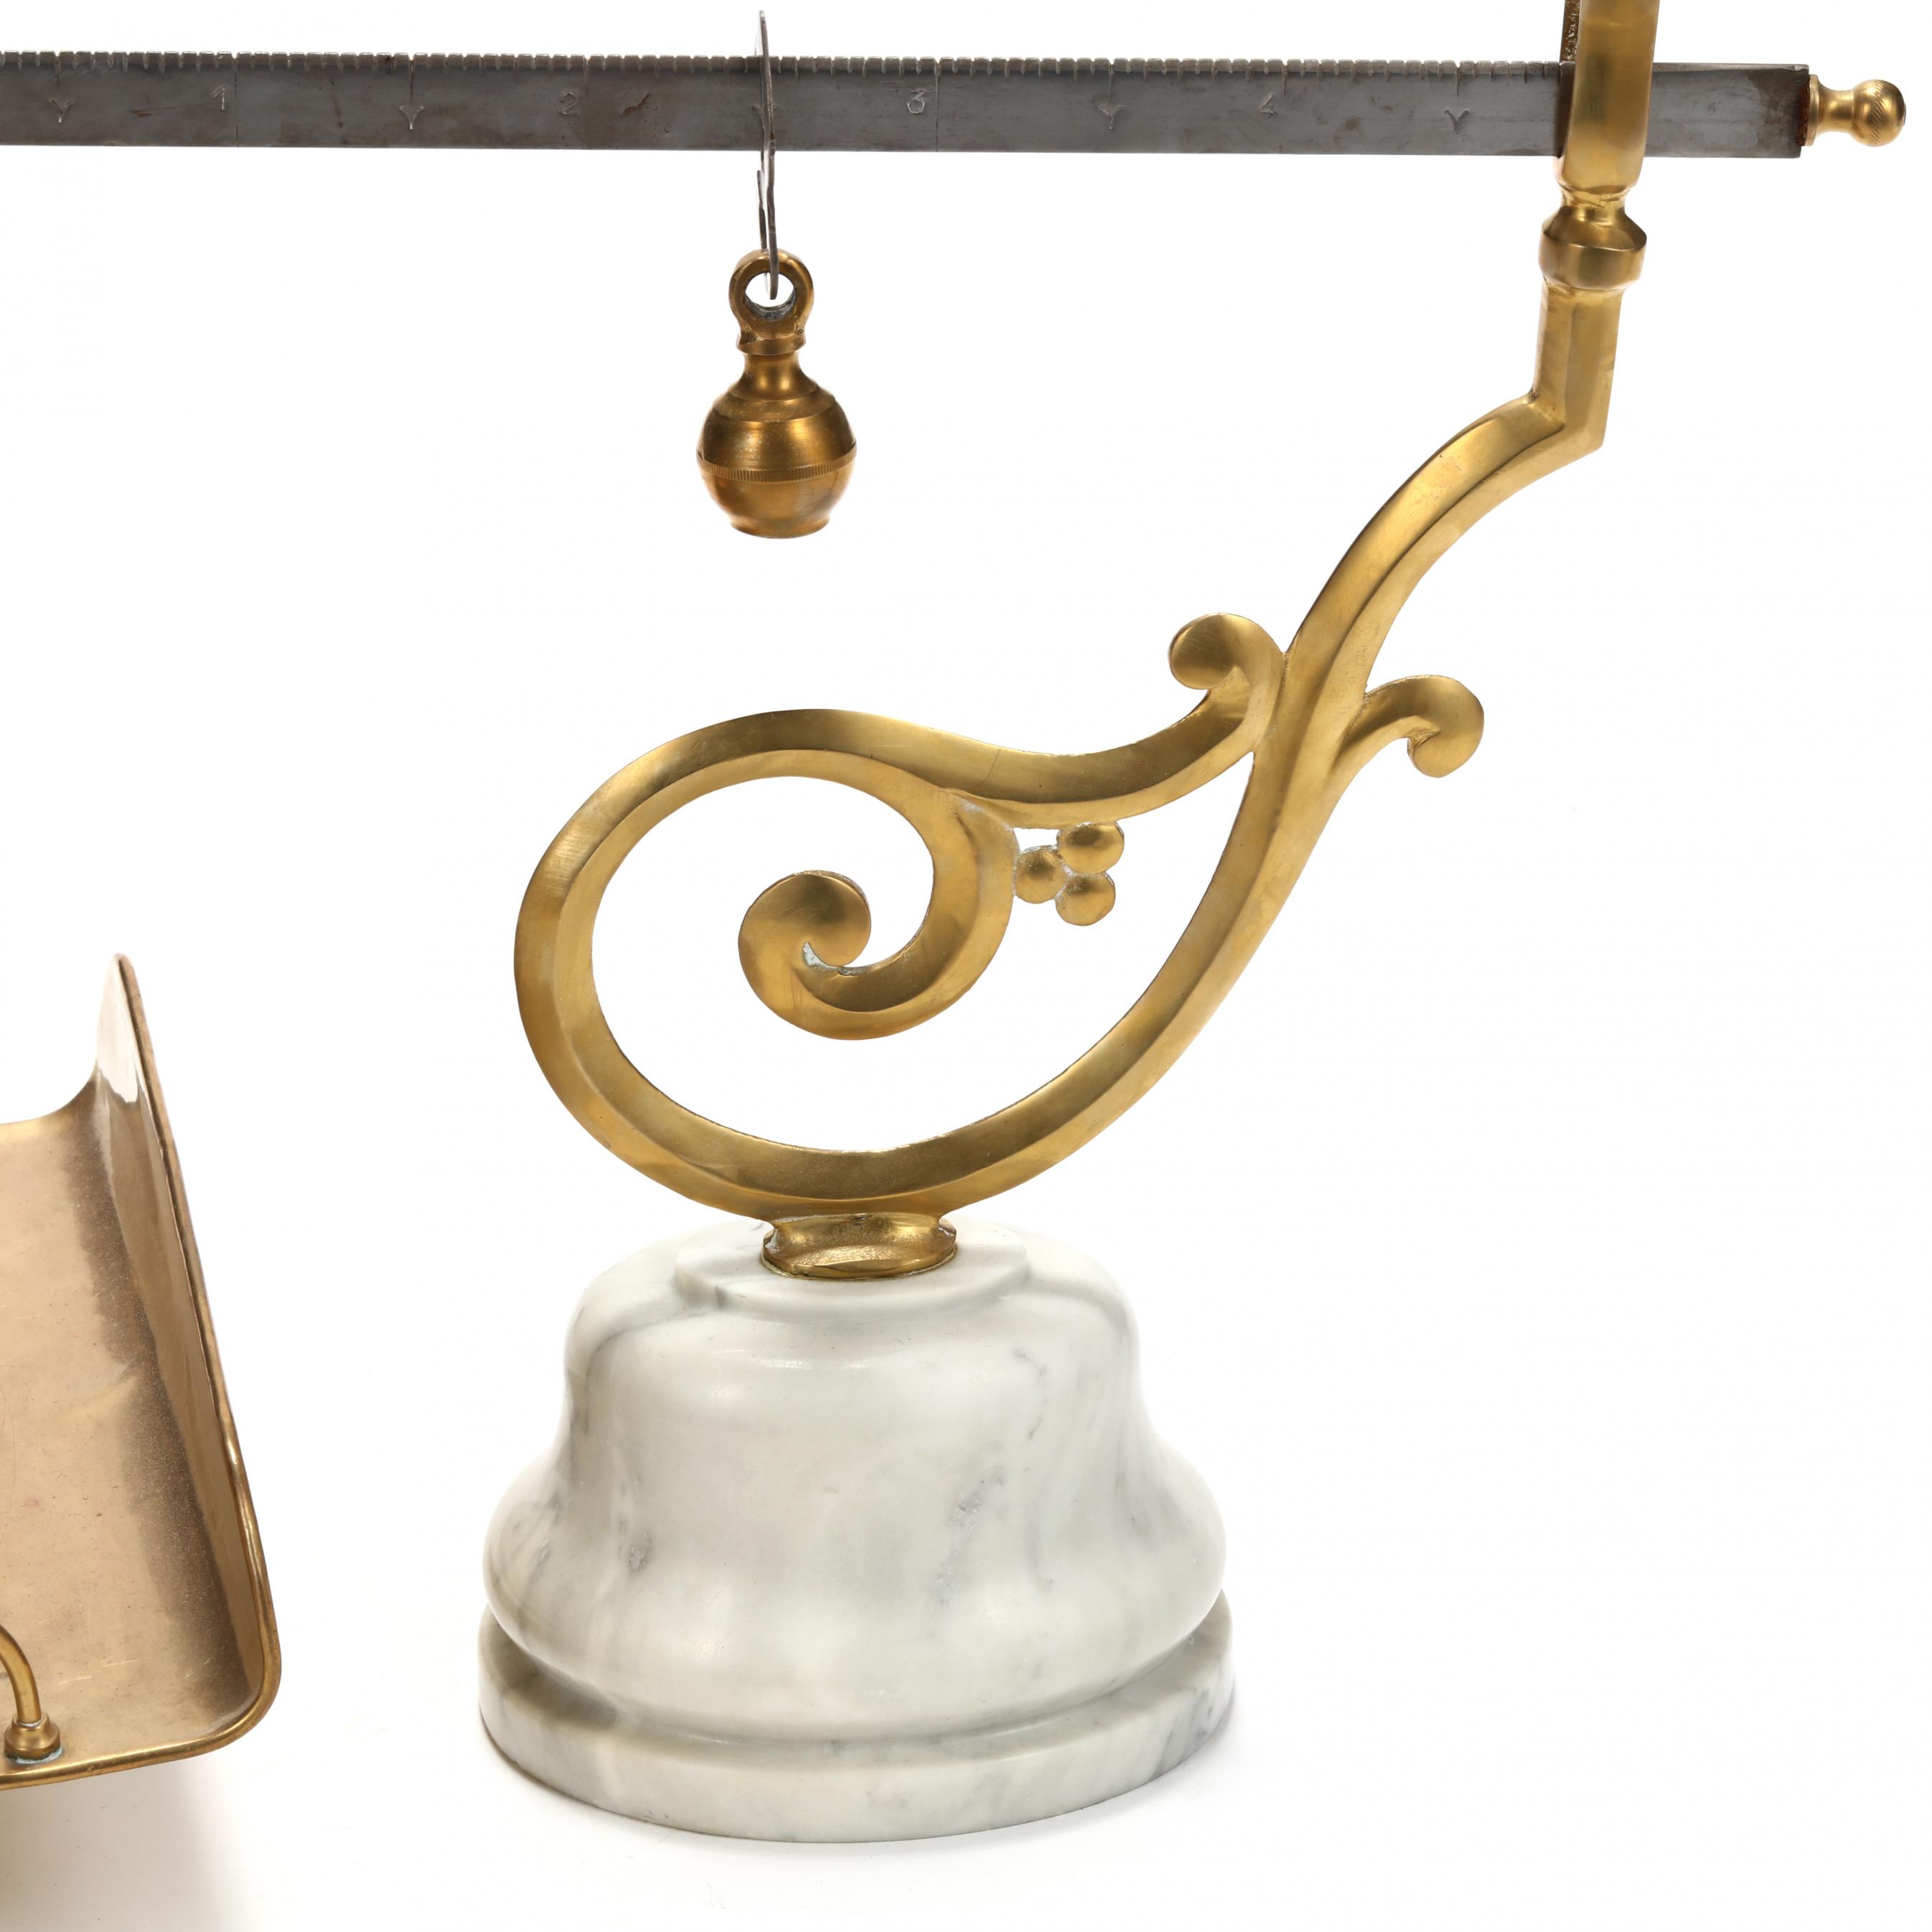 Antique Italian Brass and Marble Scale, Signed (Lot 117 - The New Year's  Estate AuctionJan 6, 2022, 10:00am)